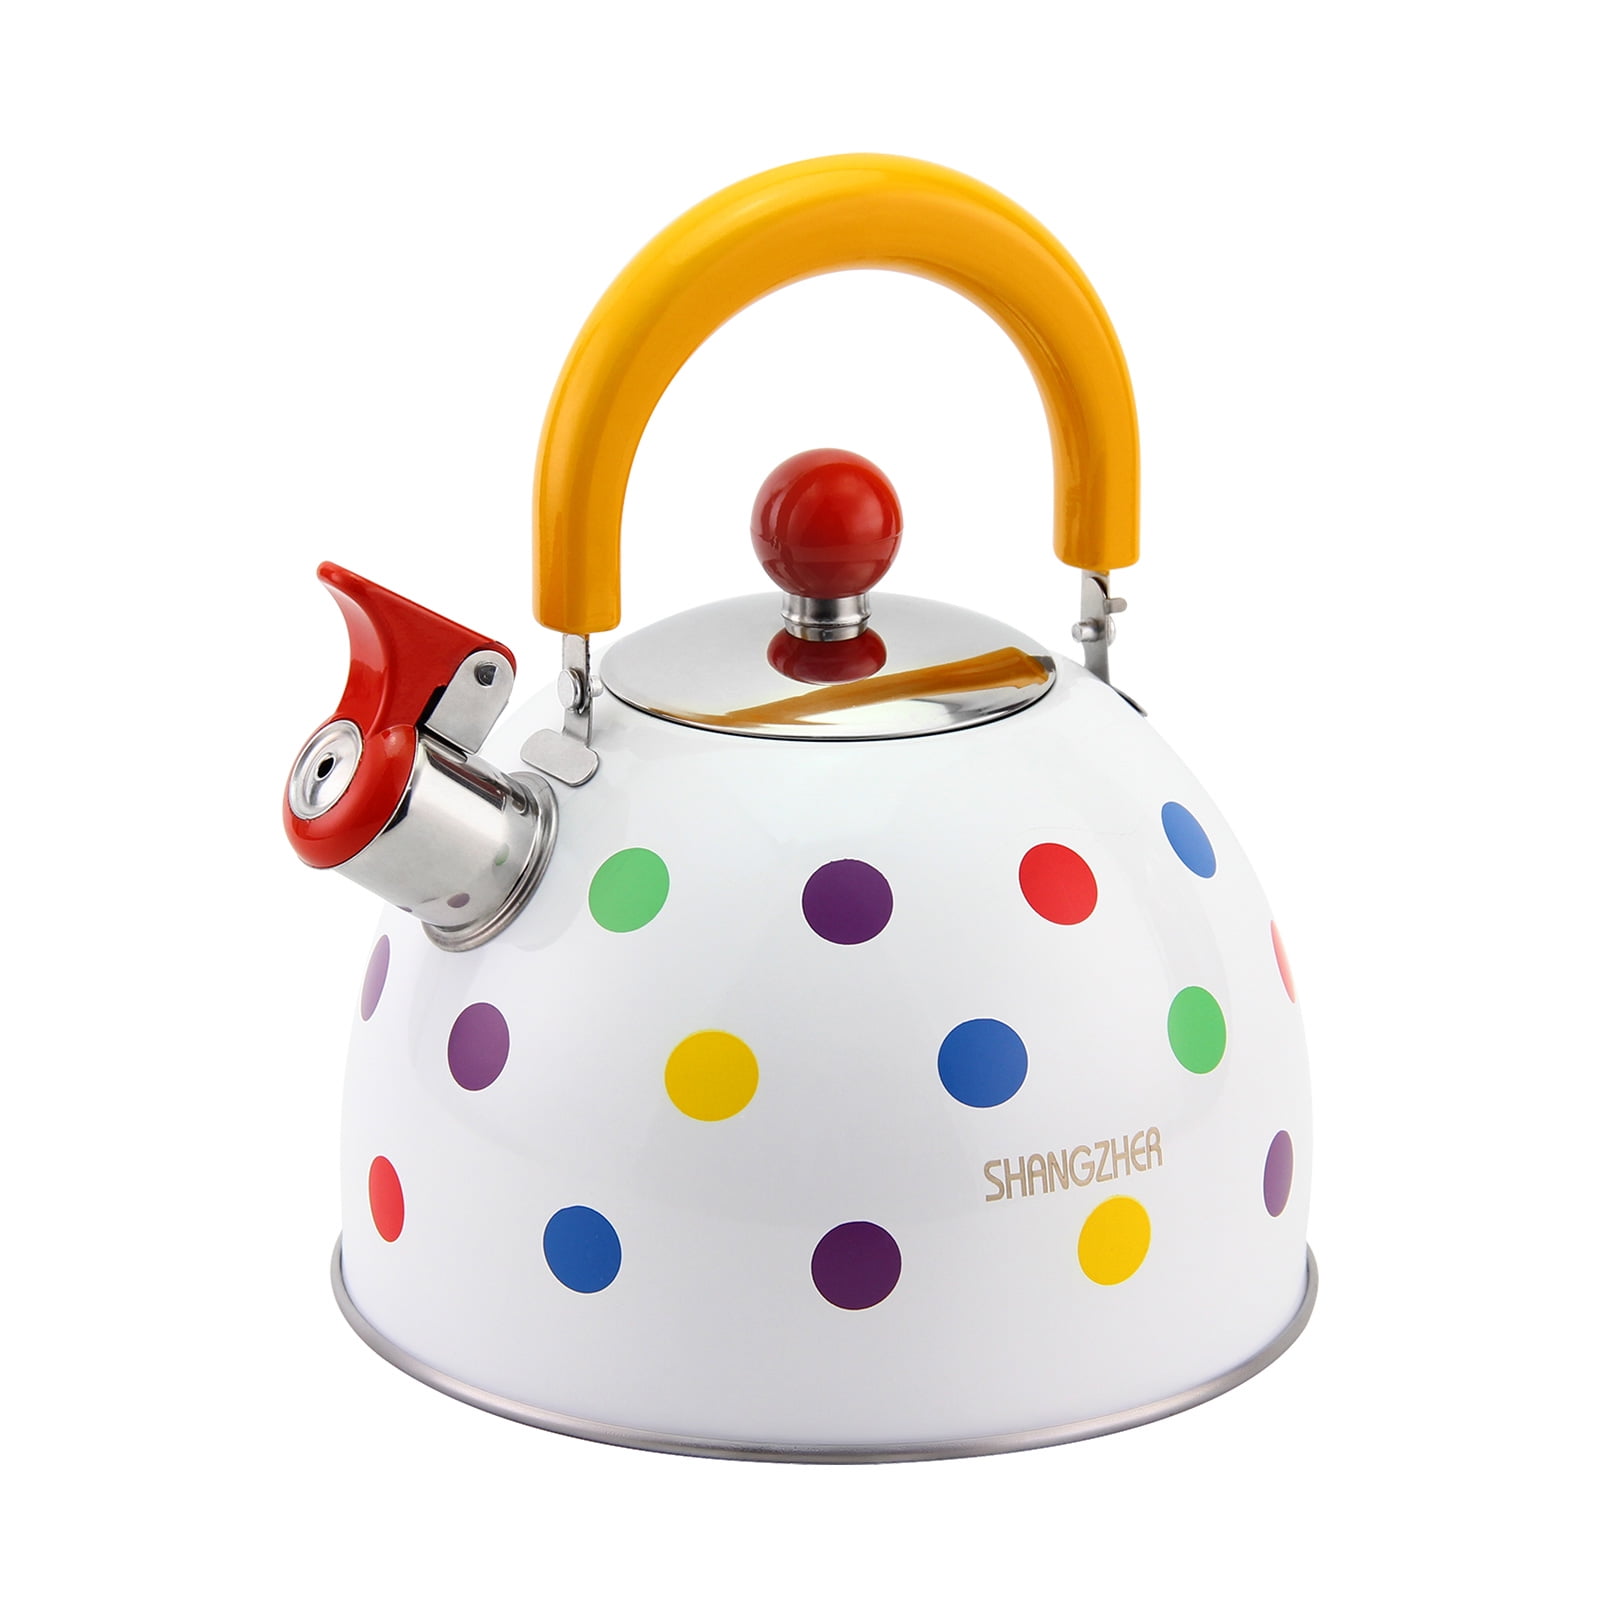 Home-X Santa Claus Whistling Kettle, Porcelain Coated Steel Kettle for Boiling Water, Cute Red Teapot, 2-Liter Capacity, 9 L x 7 W x 9 H